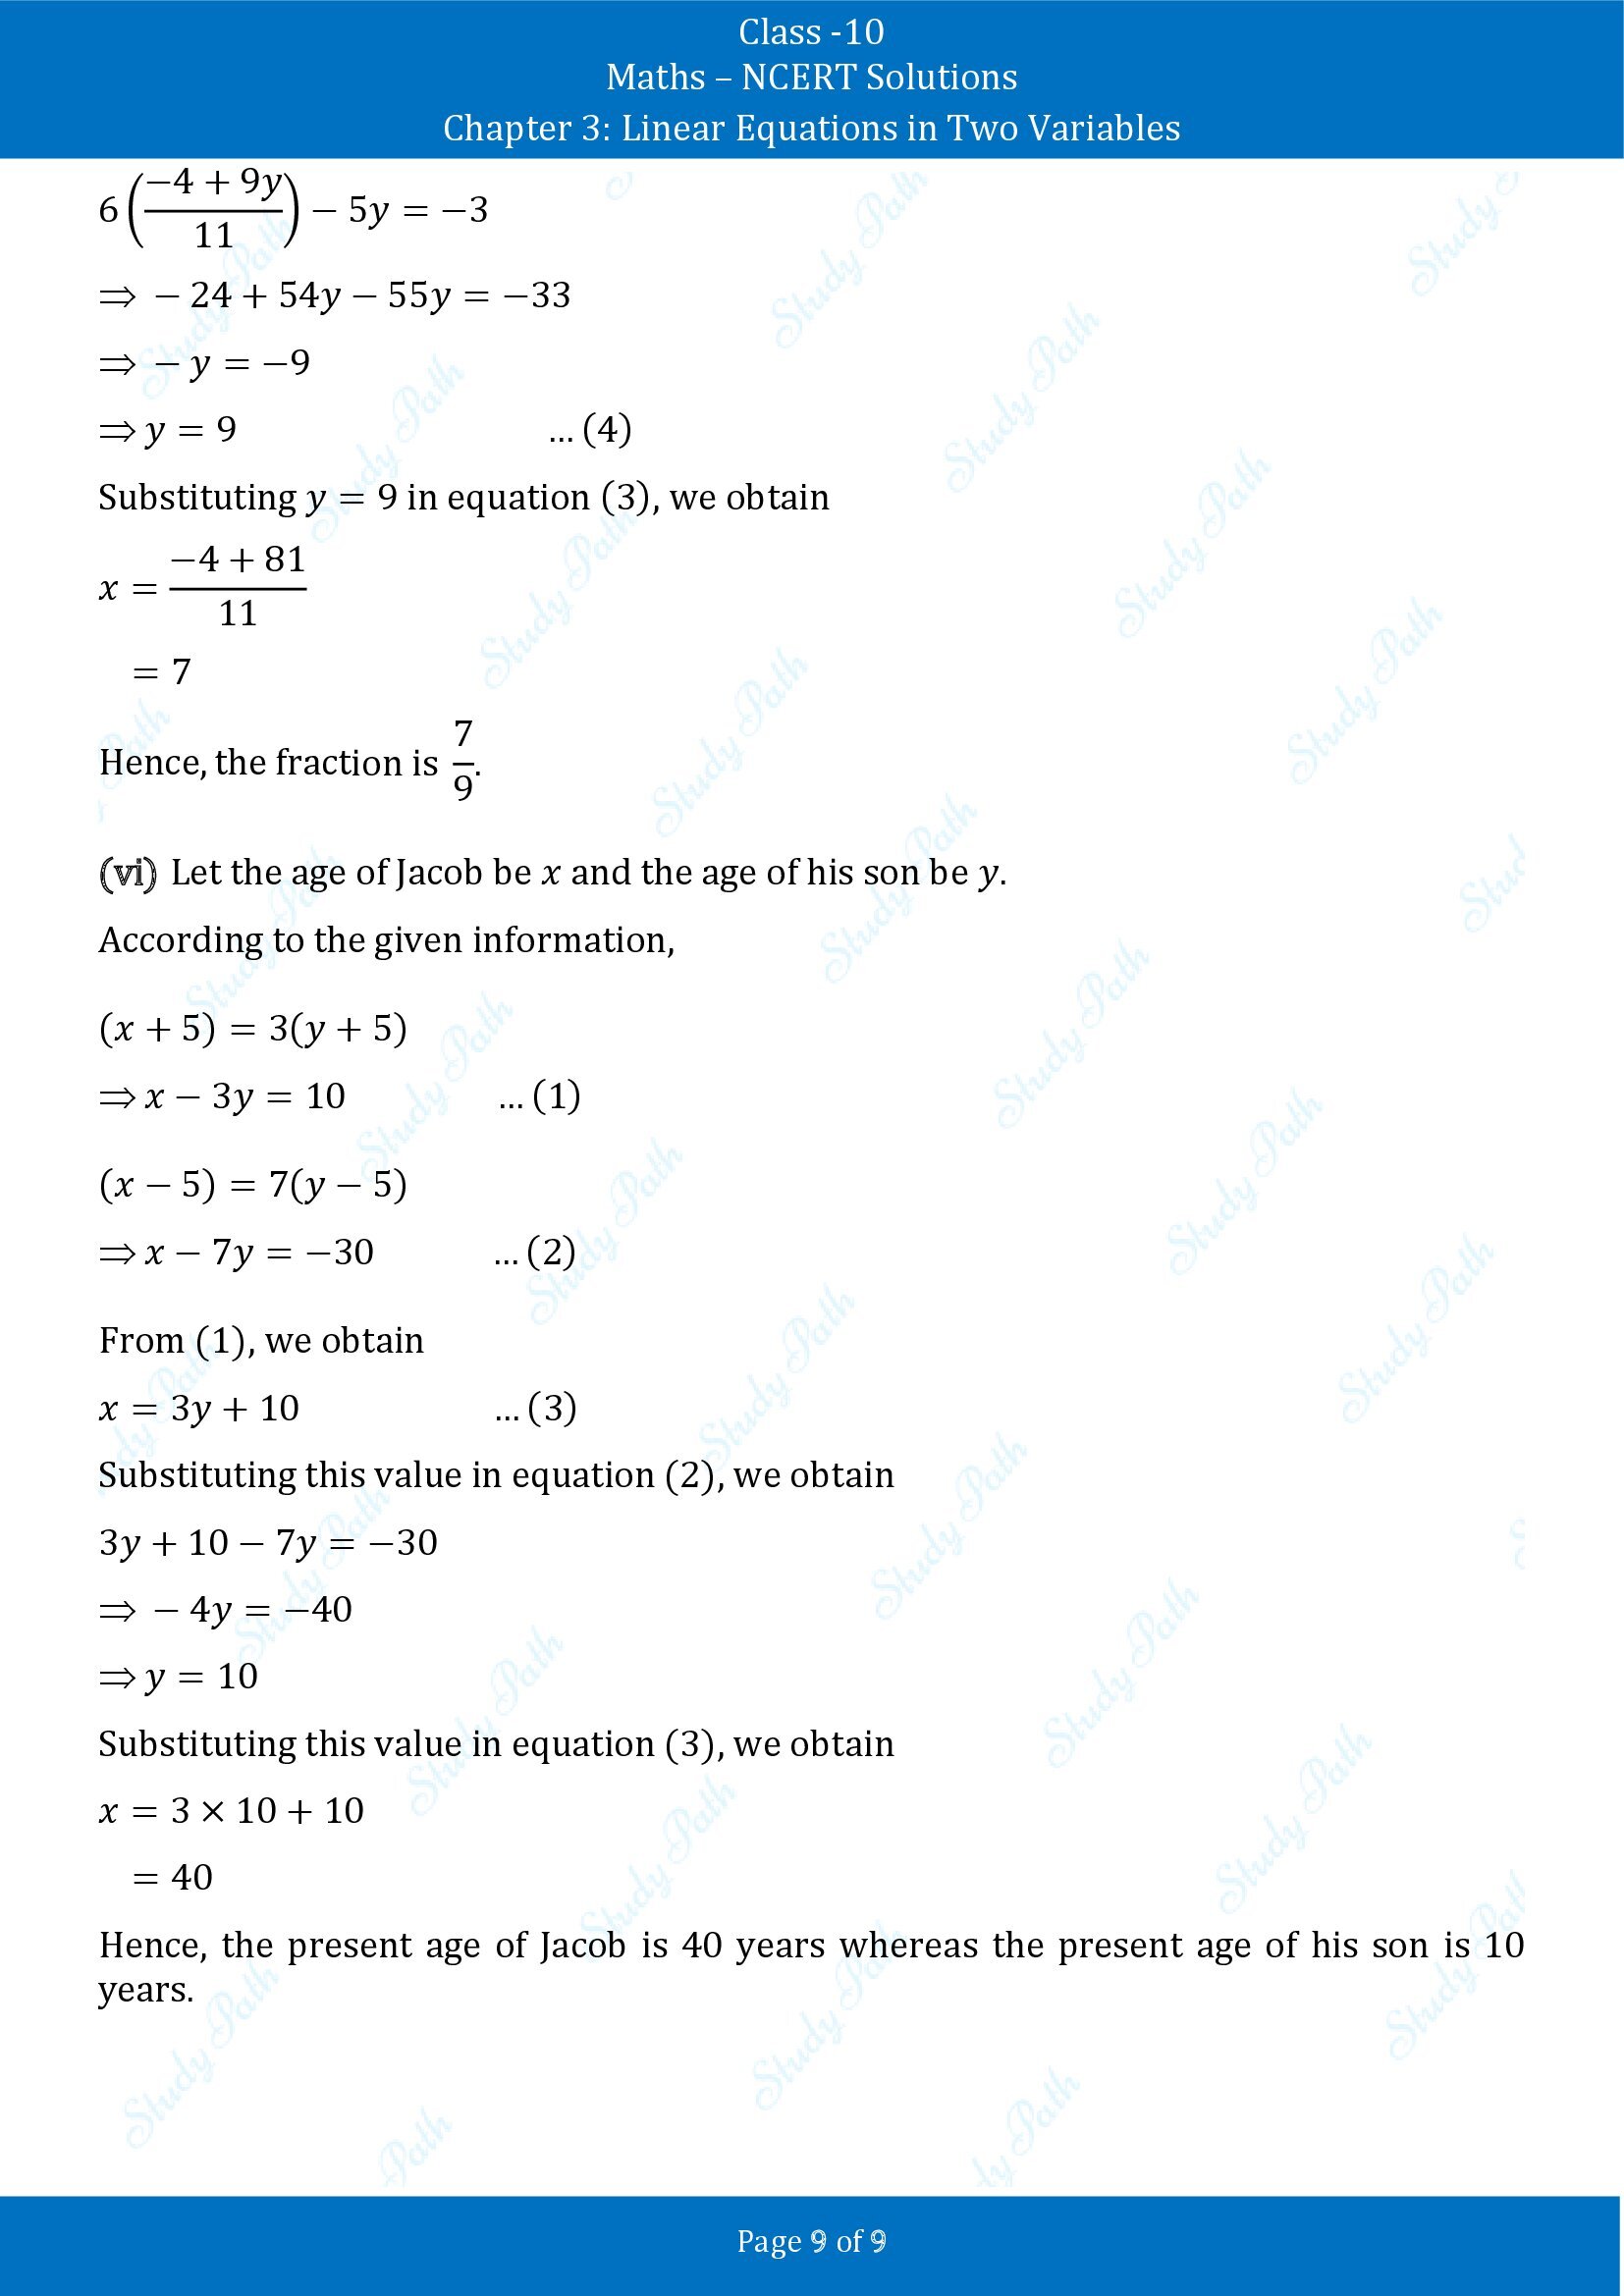 NCERT Solutions for Class 10 Maths Chapter 3 Linear Equations in Two Variables Exercise 3.3 00009